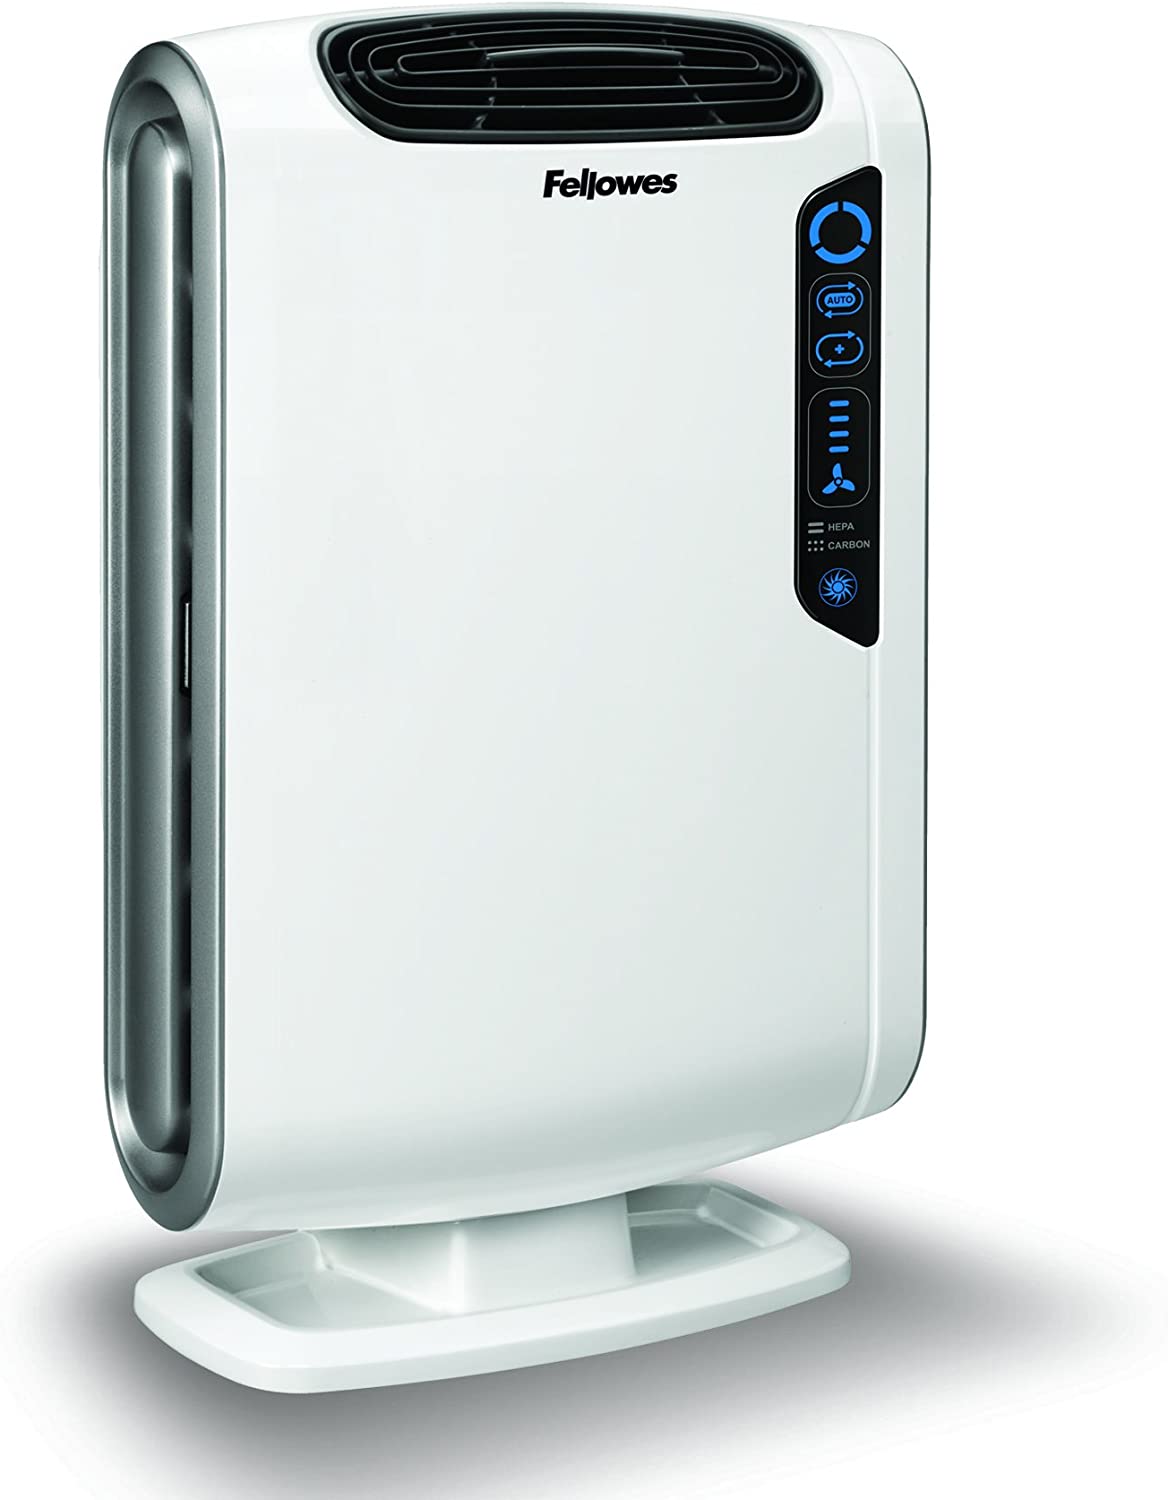 Purificador aire FELLOWES AeraMax DX55 mediano